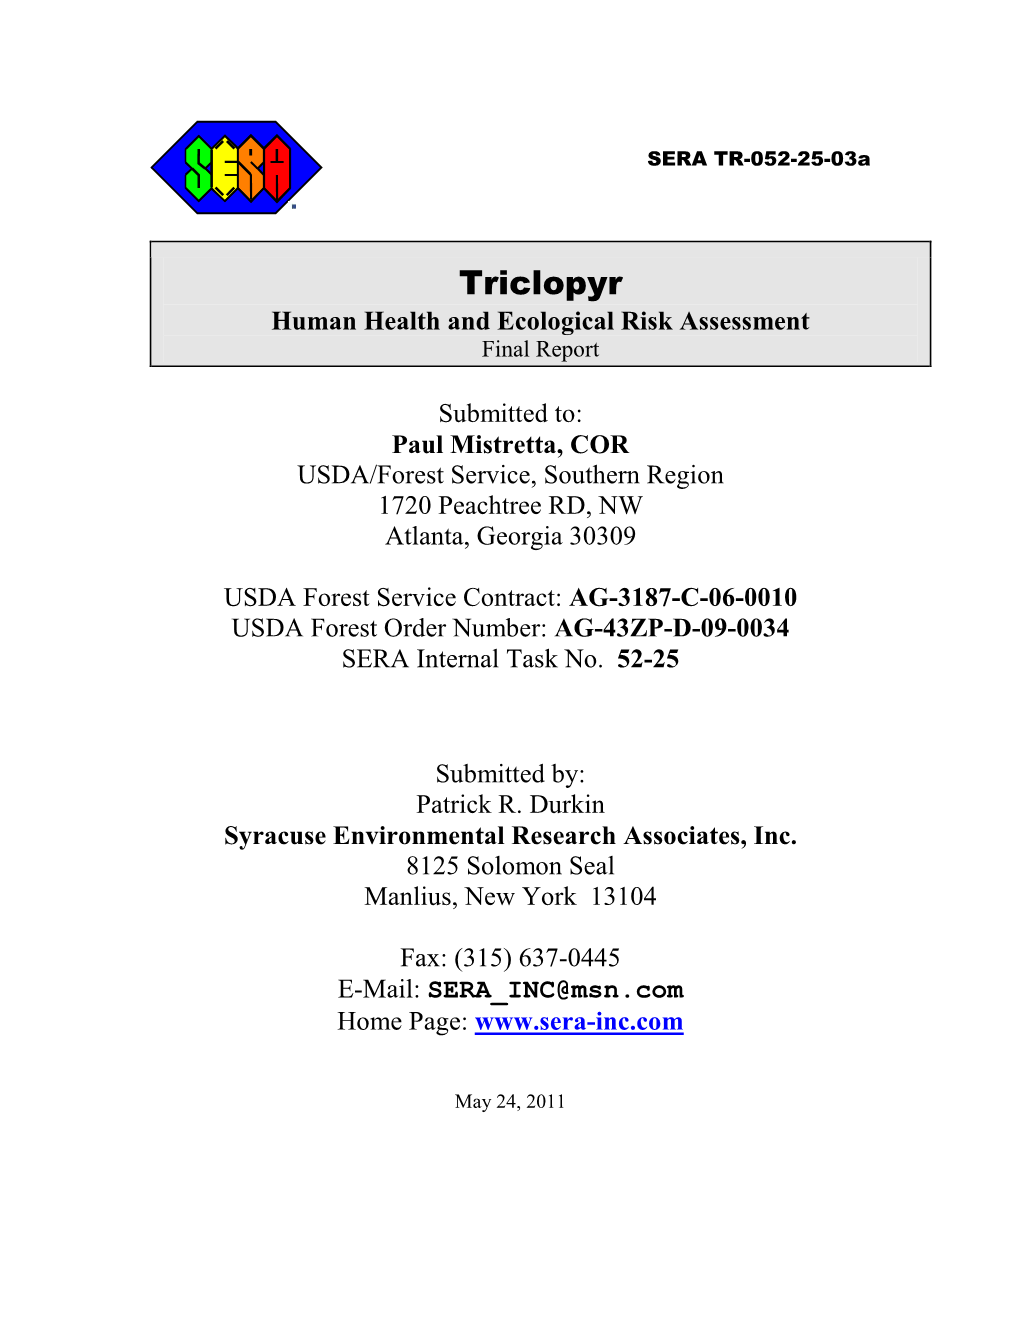 Triclopyr: Human Health and Ecological Risk Assessment”